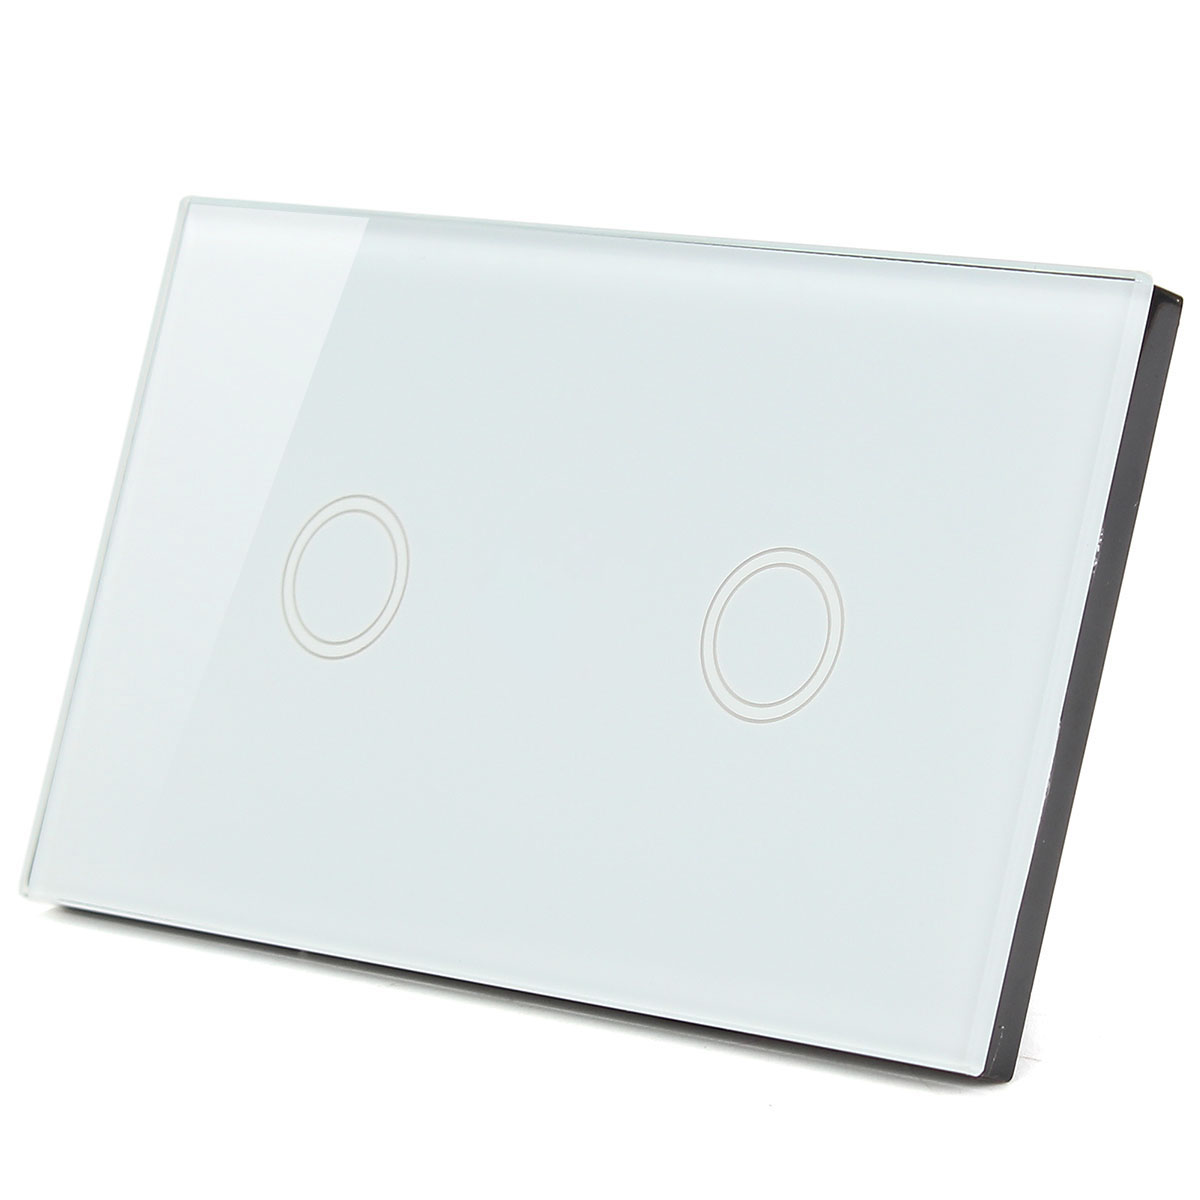 1-Way-2-Gang-Crystal-Glass-Remote-Panel-Touch-LED-Light-Switches-Controller-1134494-6